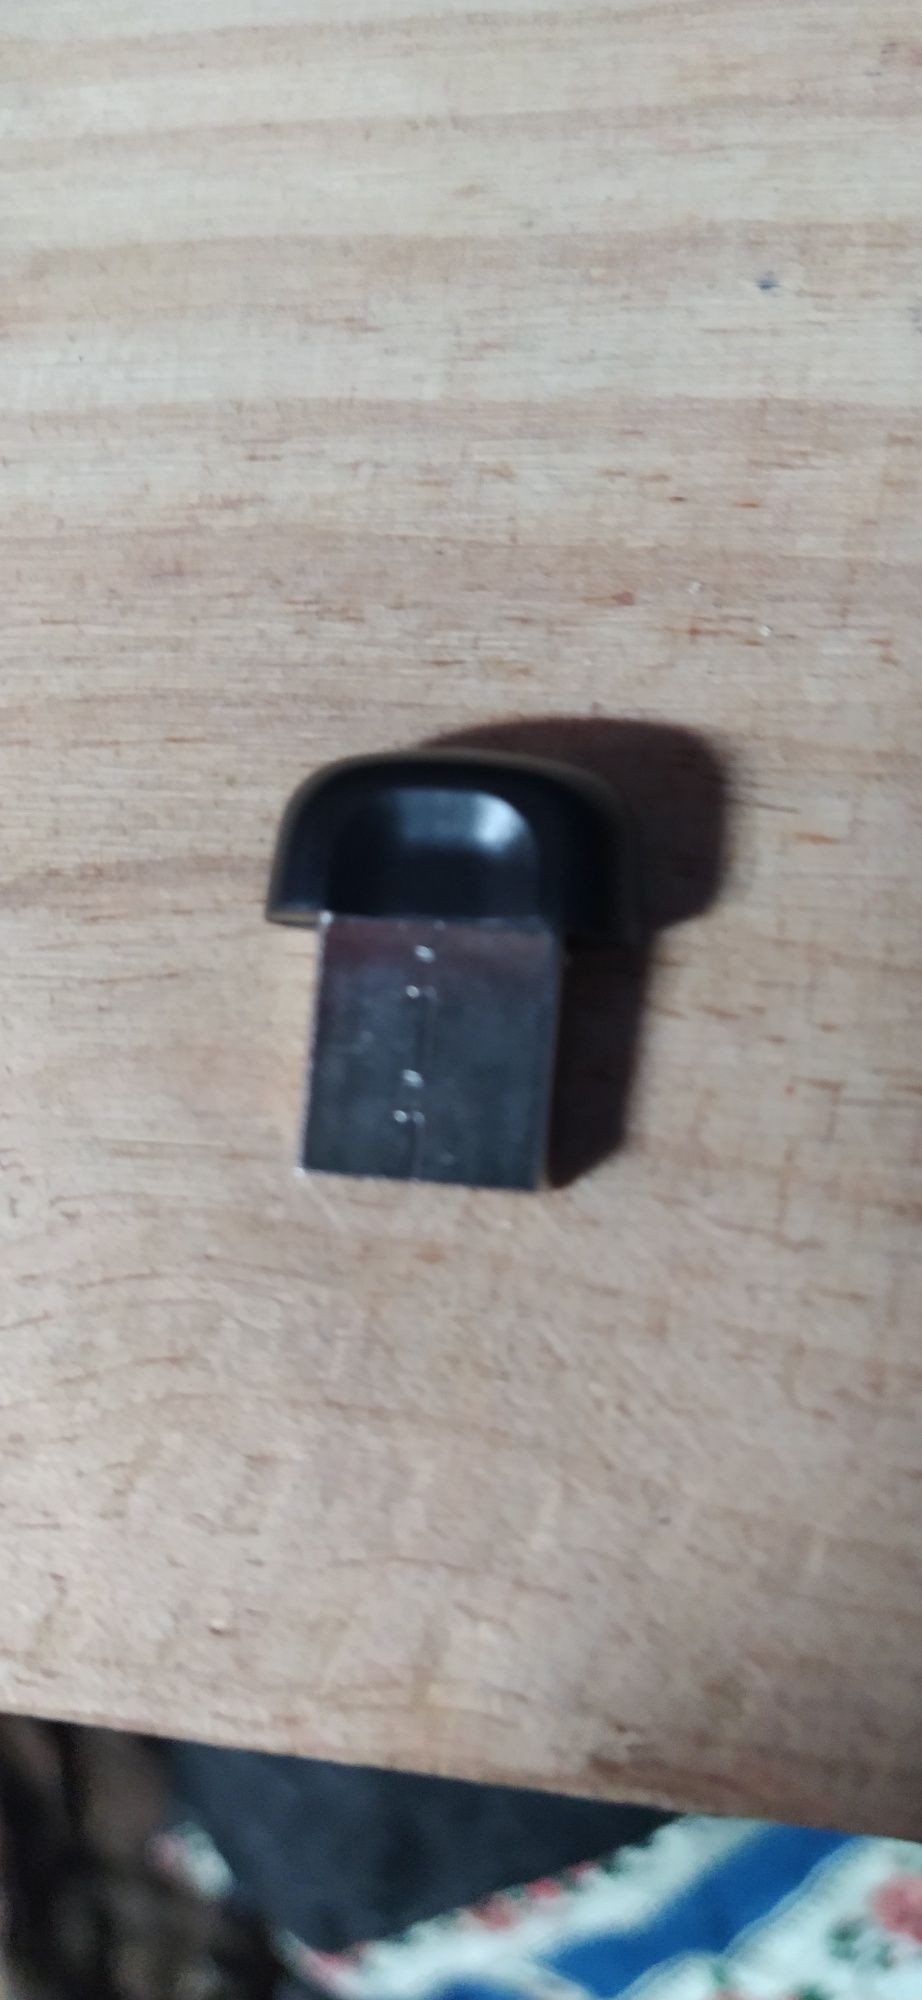 USB dongle Fitbit